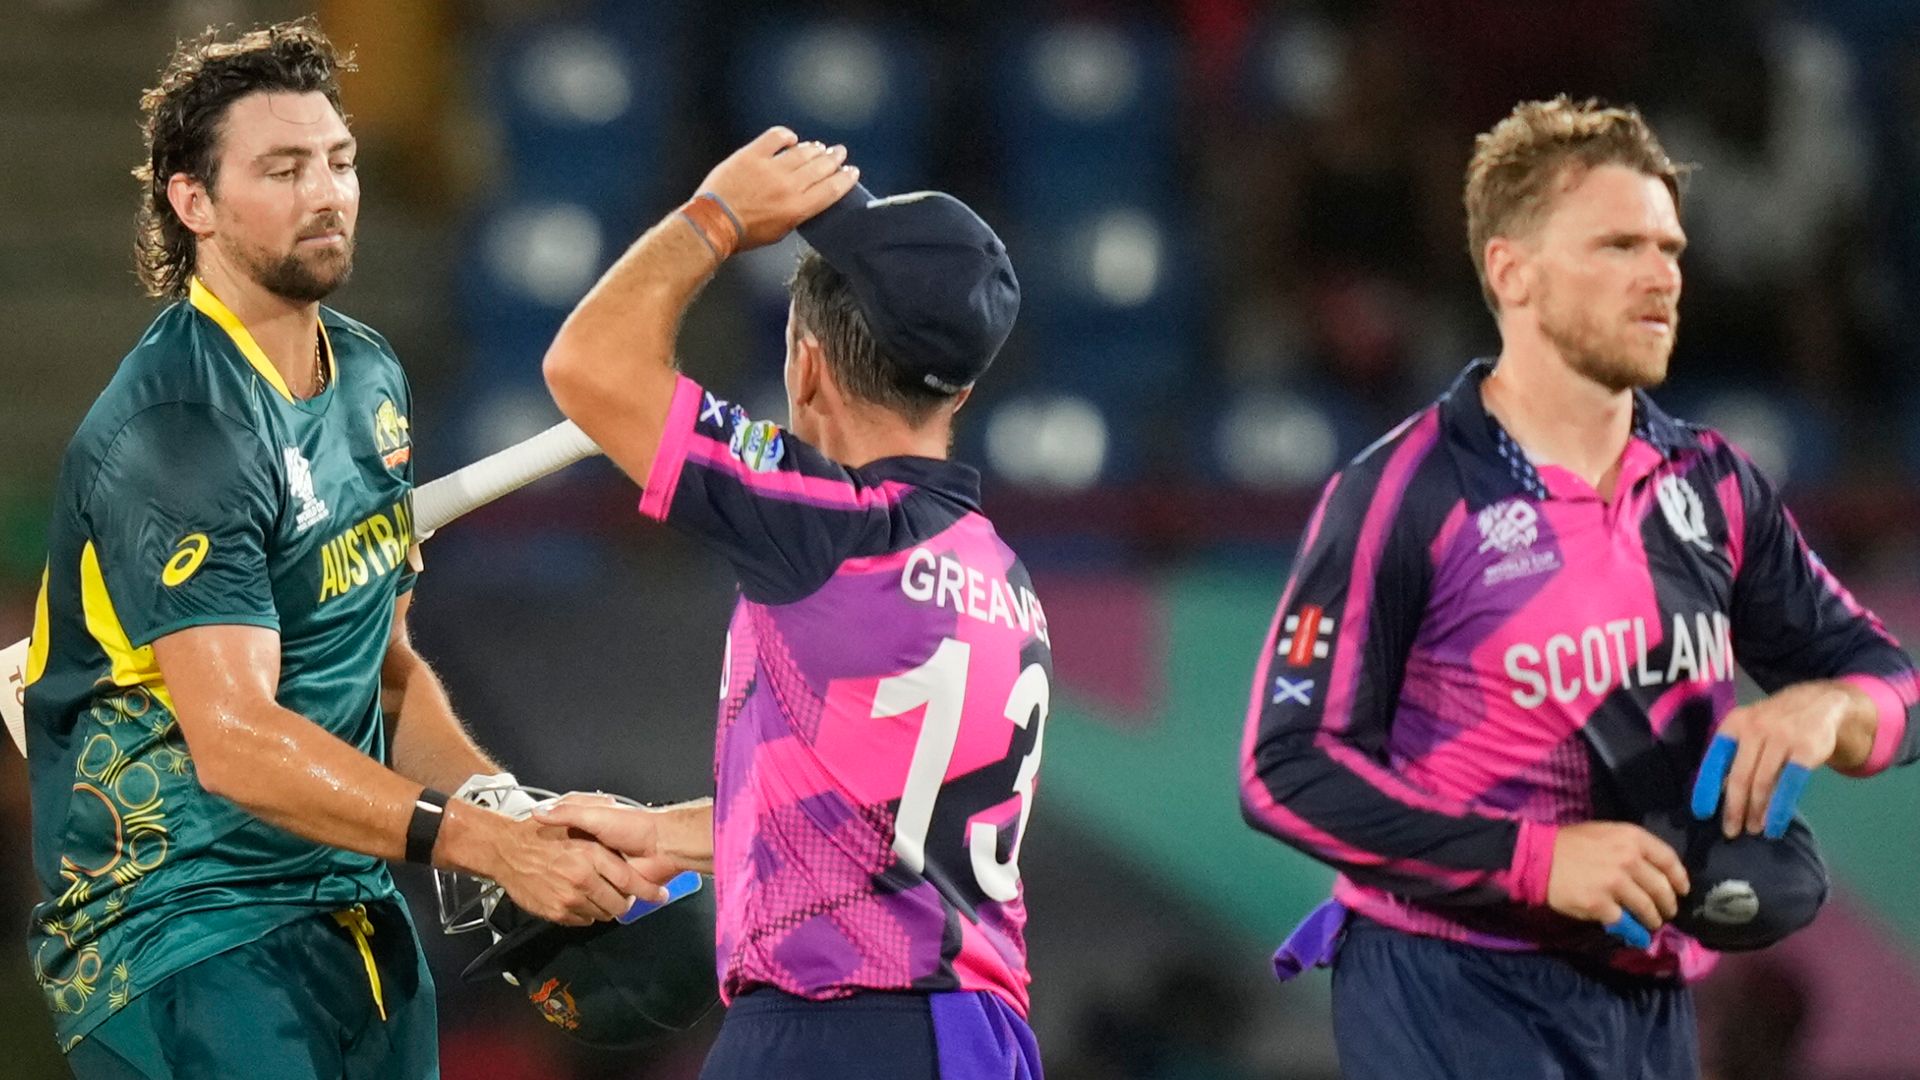 England advance at T20 World Cup as Australia knock out Scotland